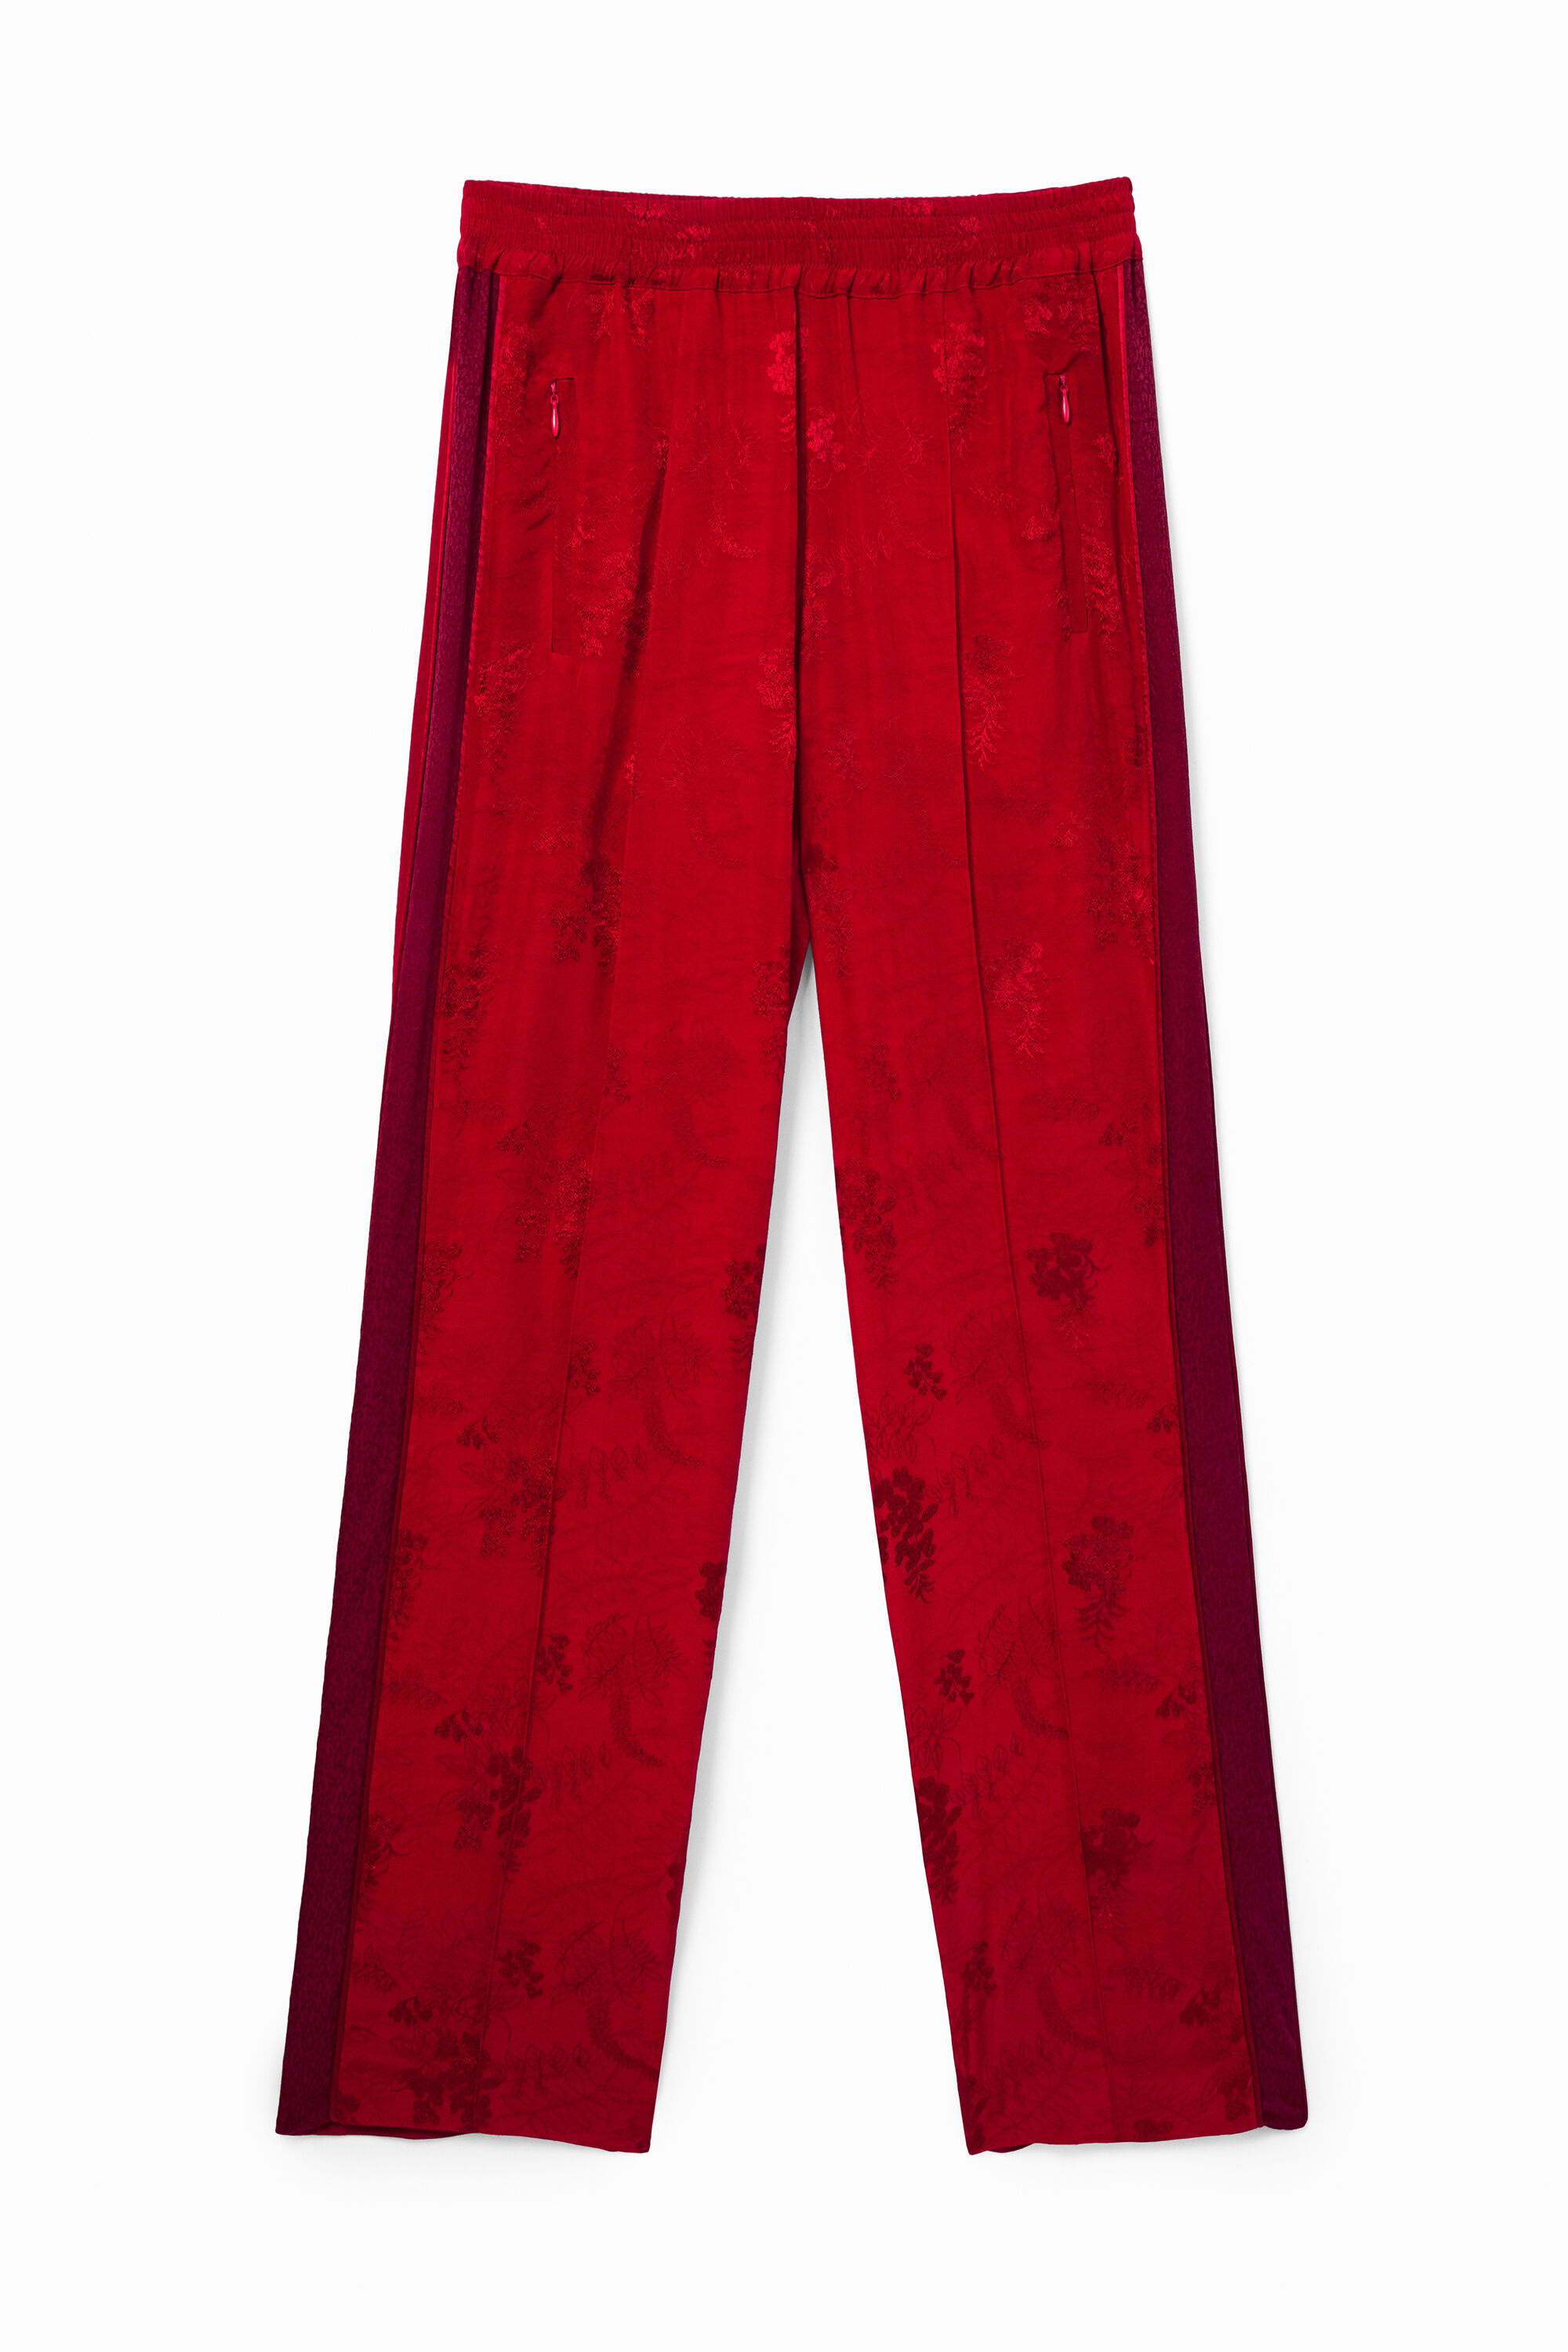 Jacquard sport trousers - RED - XS